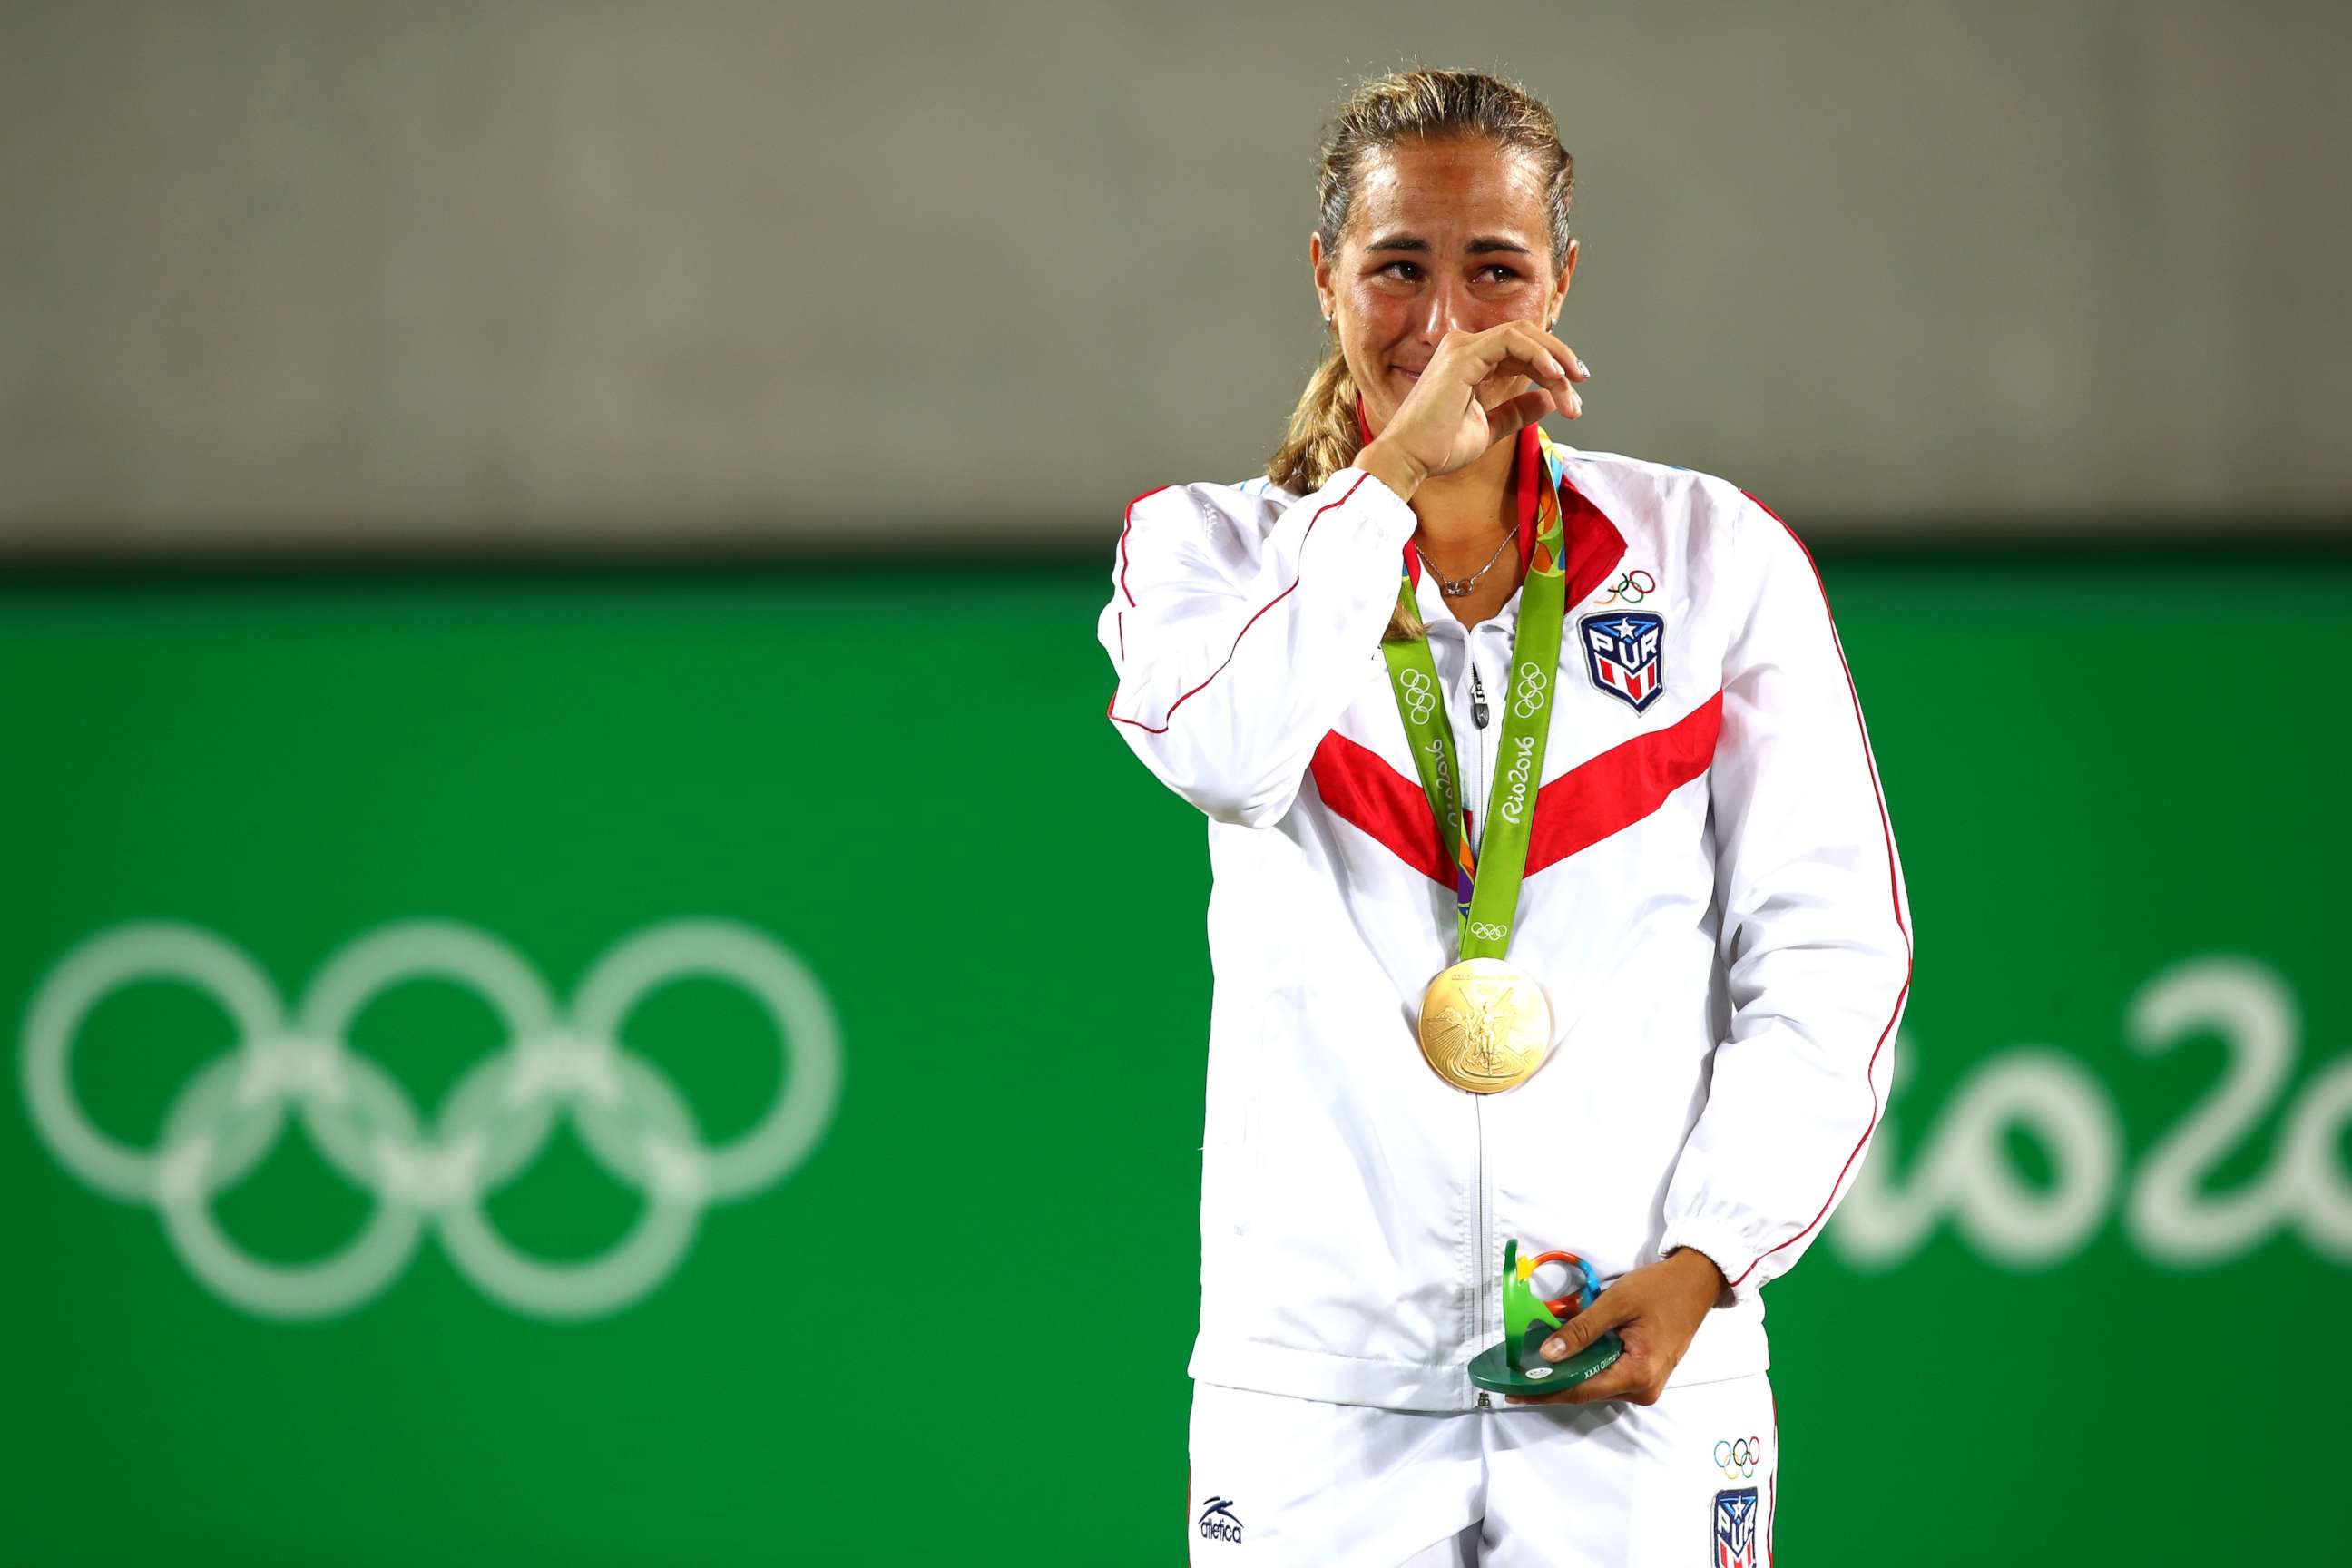 PHOTO: Gold medalist Monica Puig of Puerto Rico reacts during the medal ceremony for the Women's Singles Gold Medal Match on Day 8 of the Rio 2016 Olympic Games at the Olympic Tennis Centre, Aug. 13, 2016, in Rio de Janeiro, Brazil.